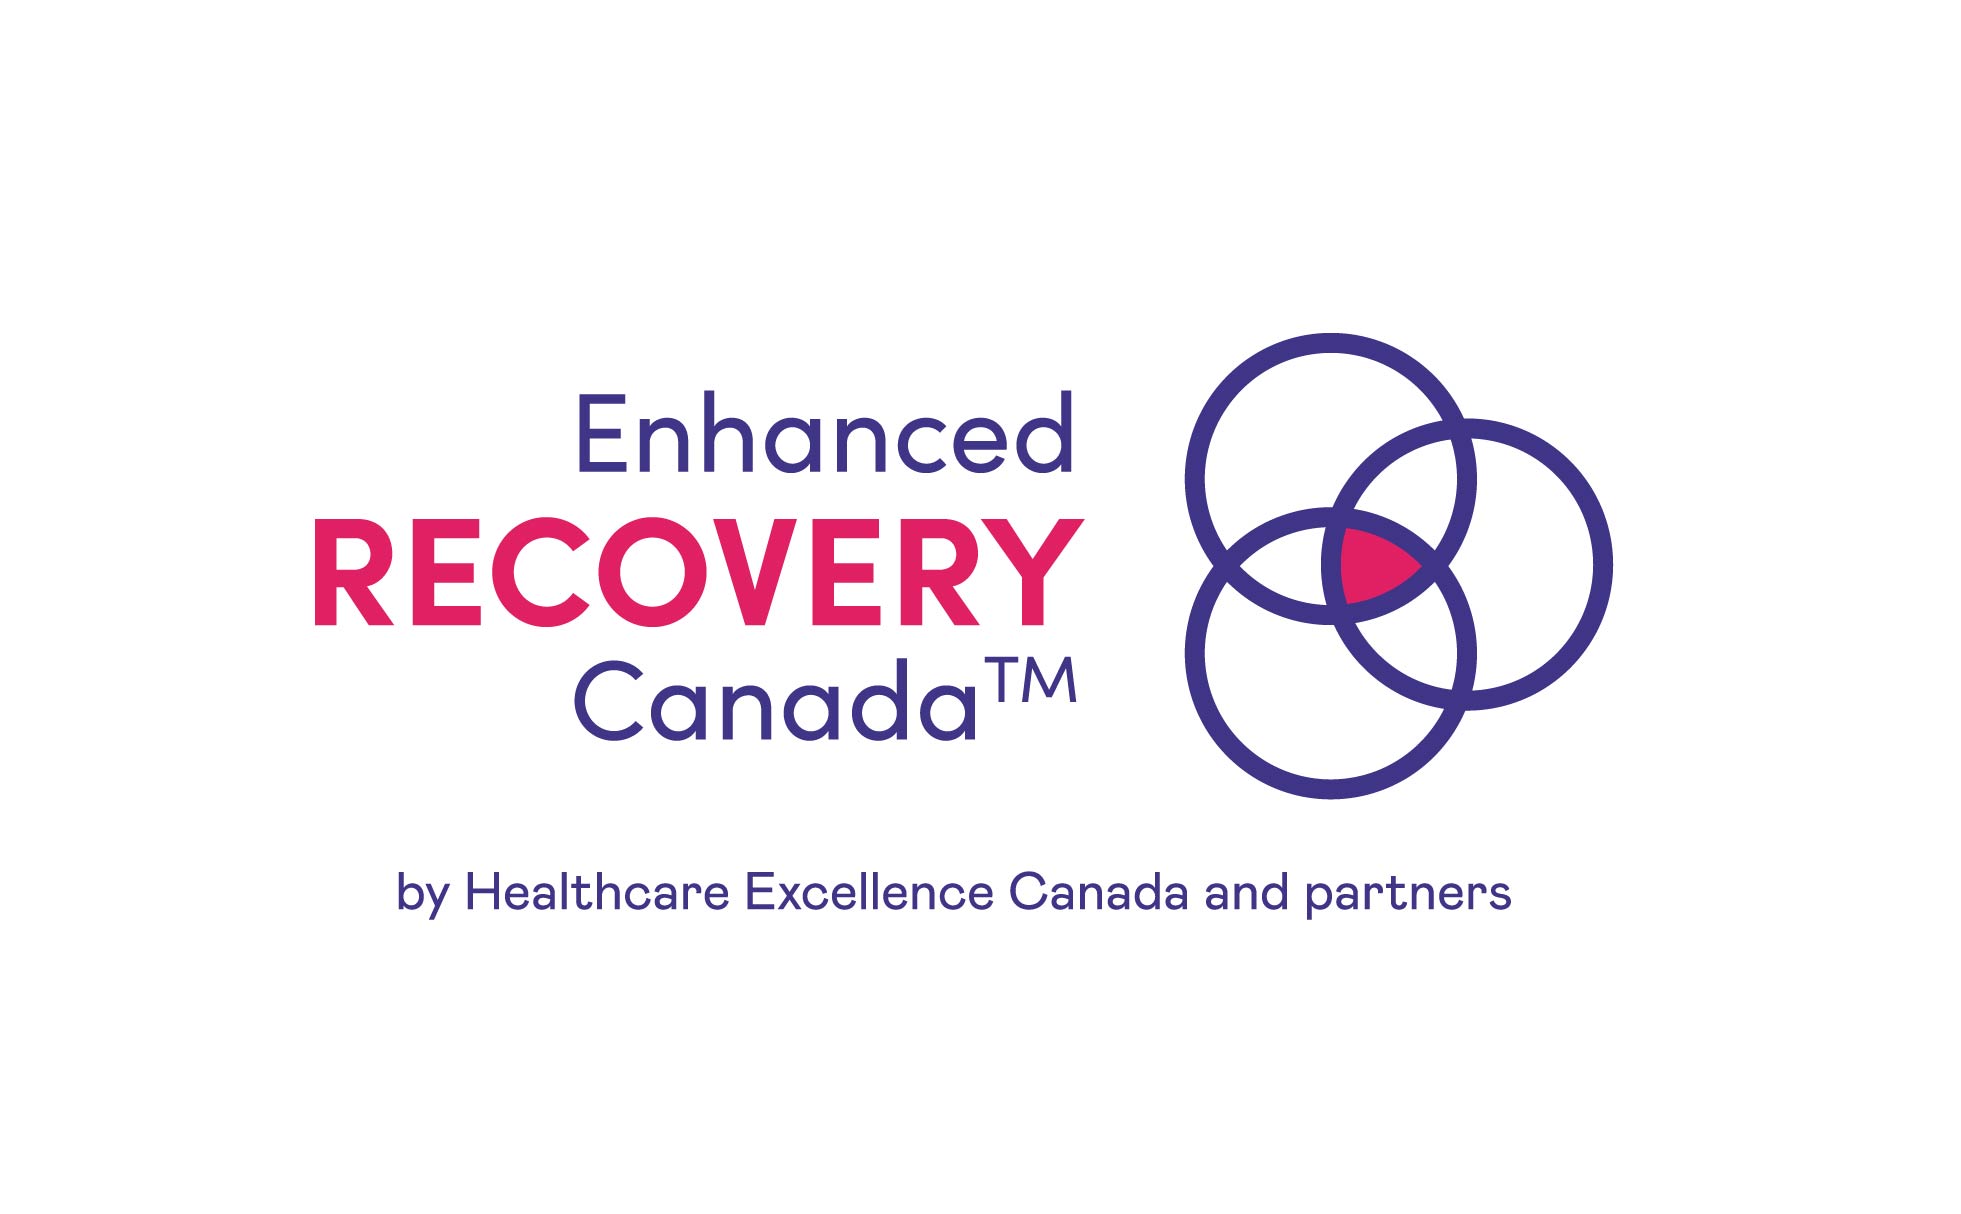 Enhanced Recovery Canada, Putting patients first, improving patient safety